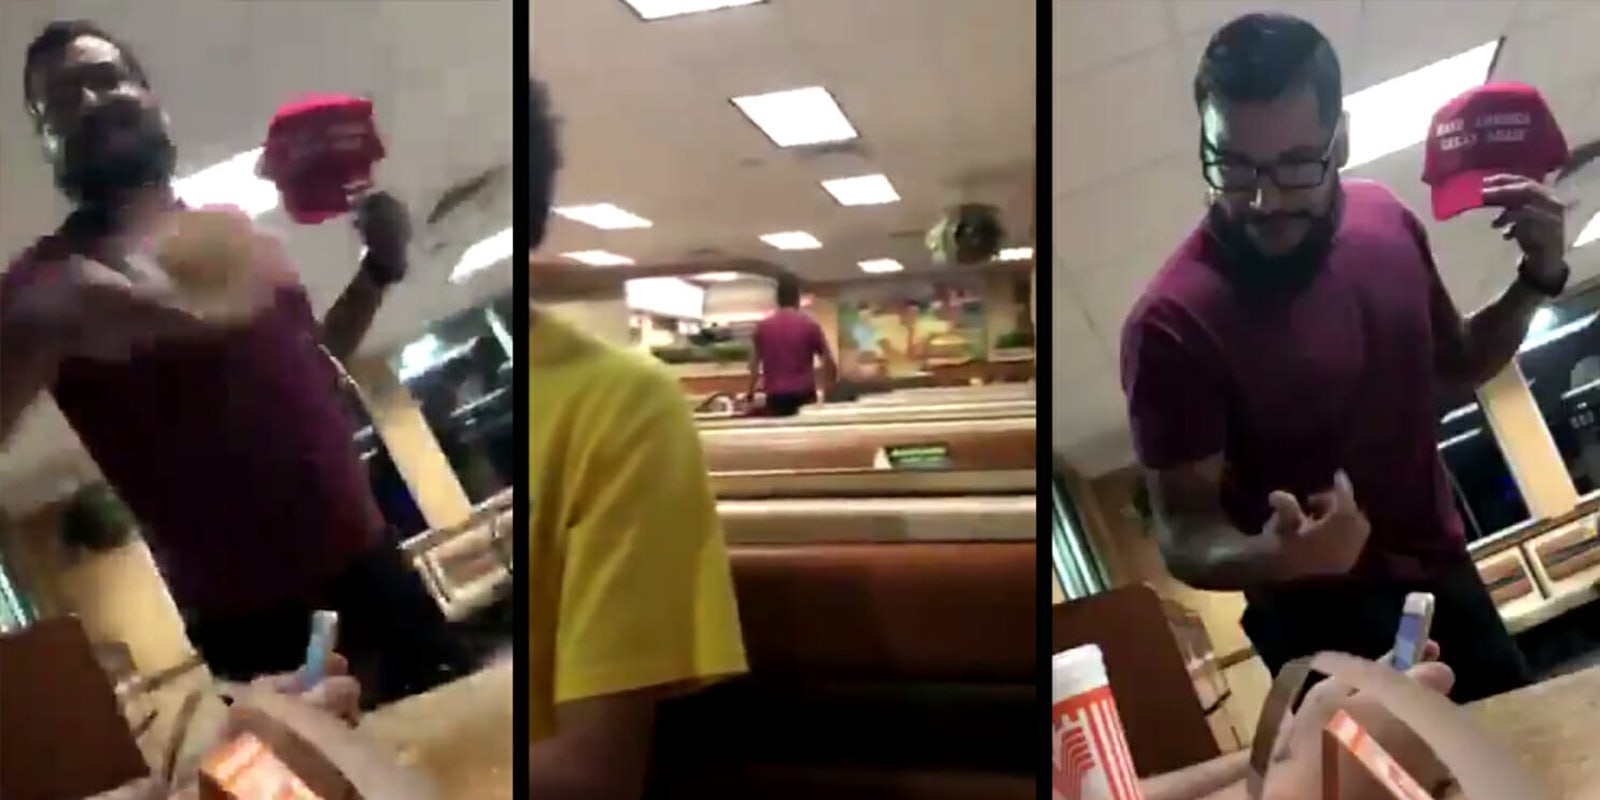 A video appears to show a Trump supporter in Whataburger in Texas being confronted.